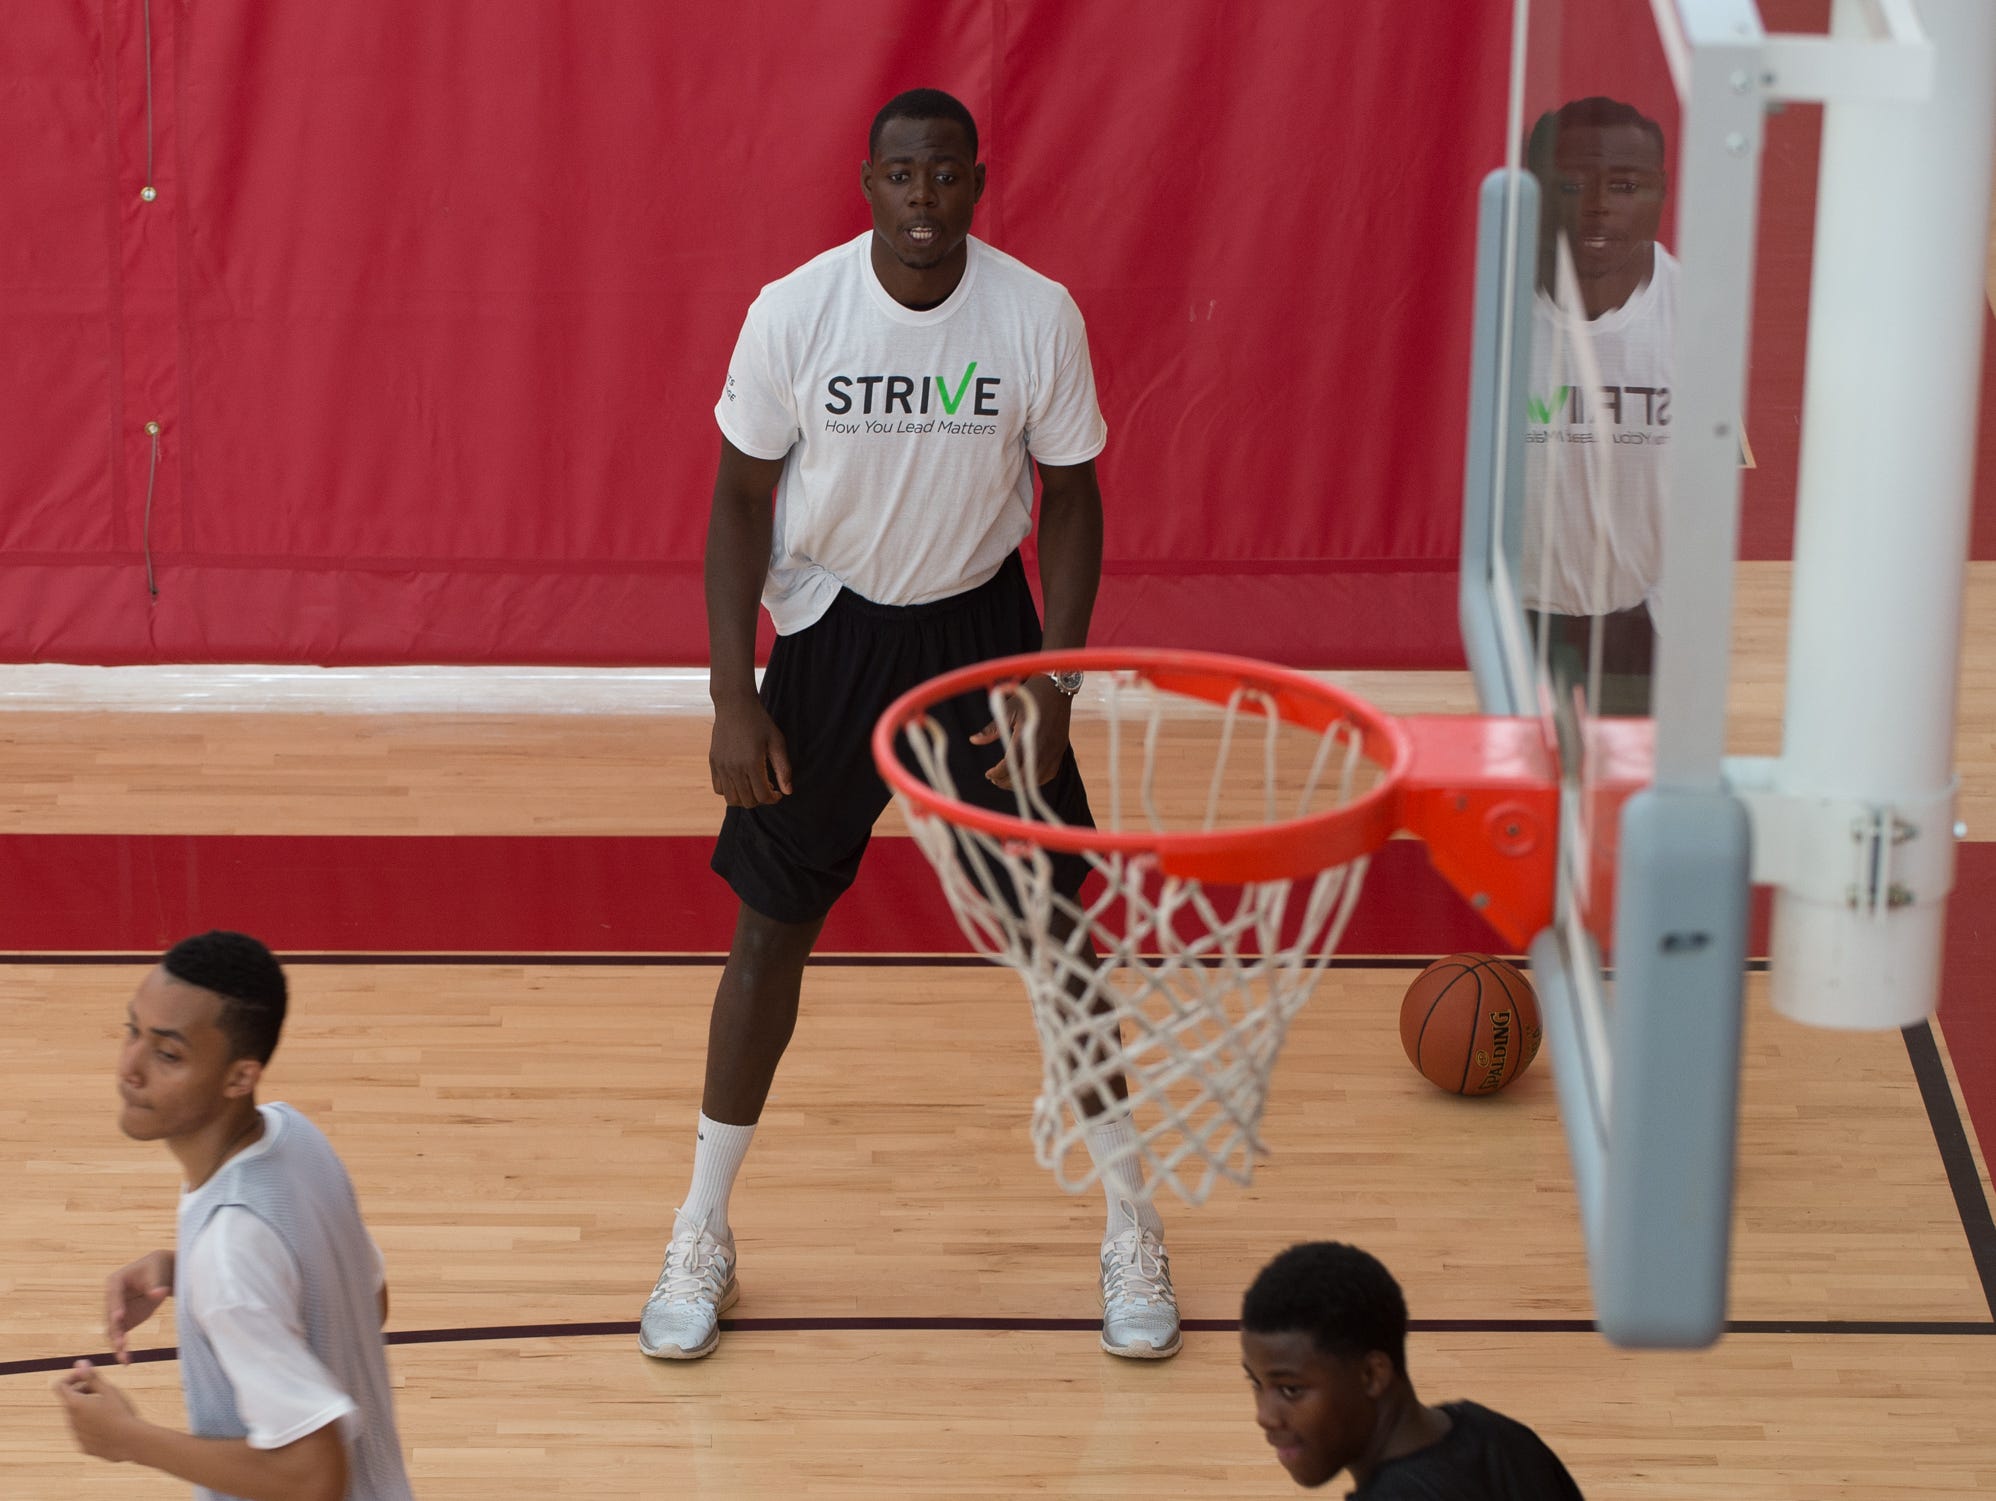 St. Andrew's School alumni, Eric Boateng, working with basketball players during the Strive Sports Challenge at St. Andrew's School in Middletown, Del,.